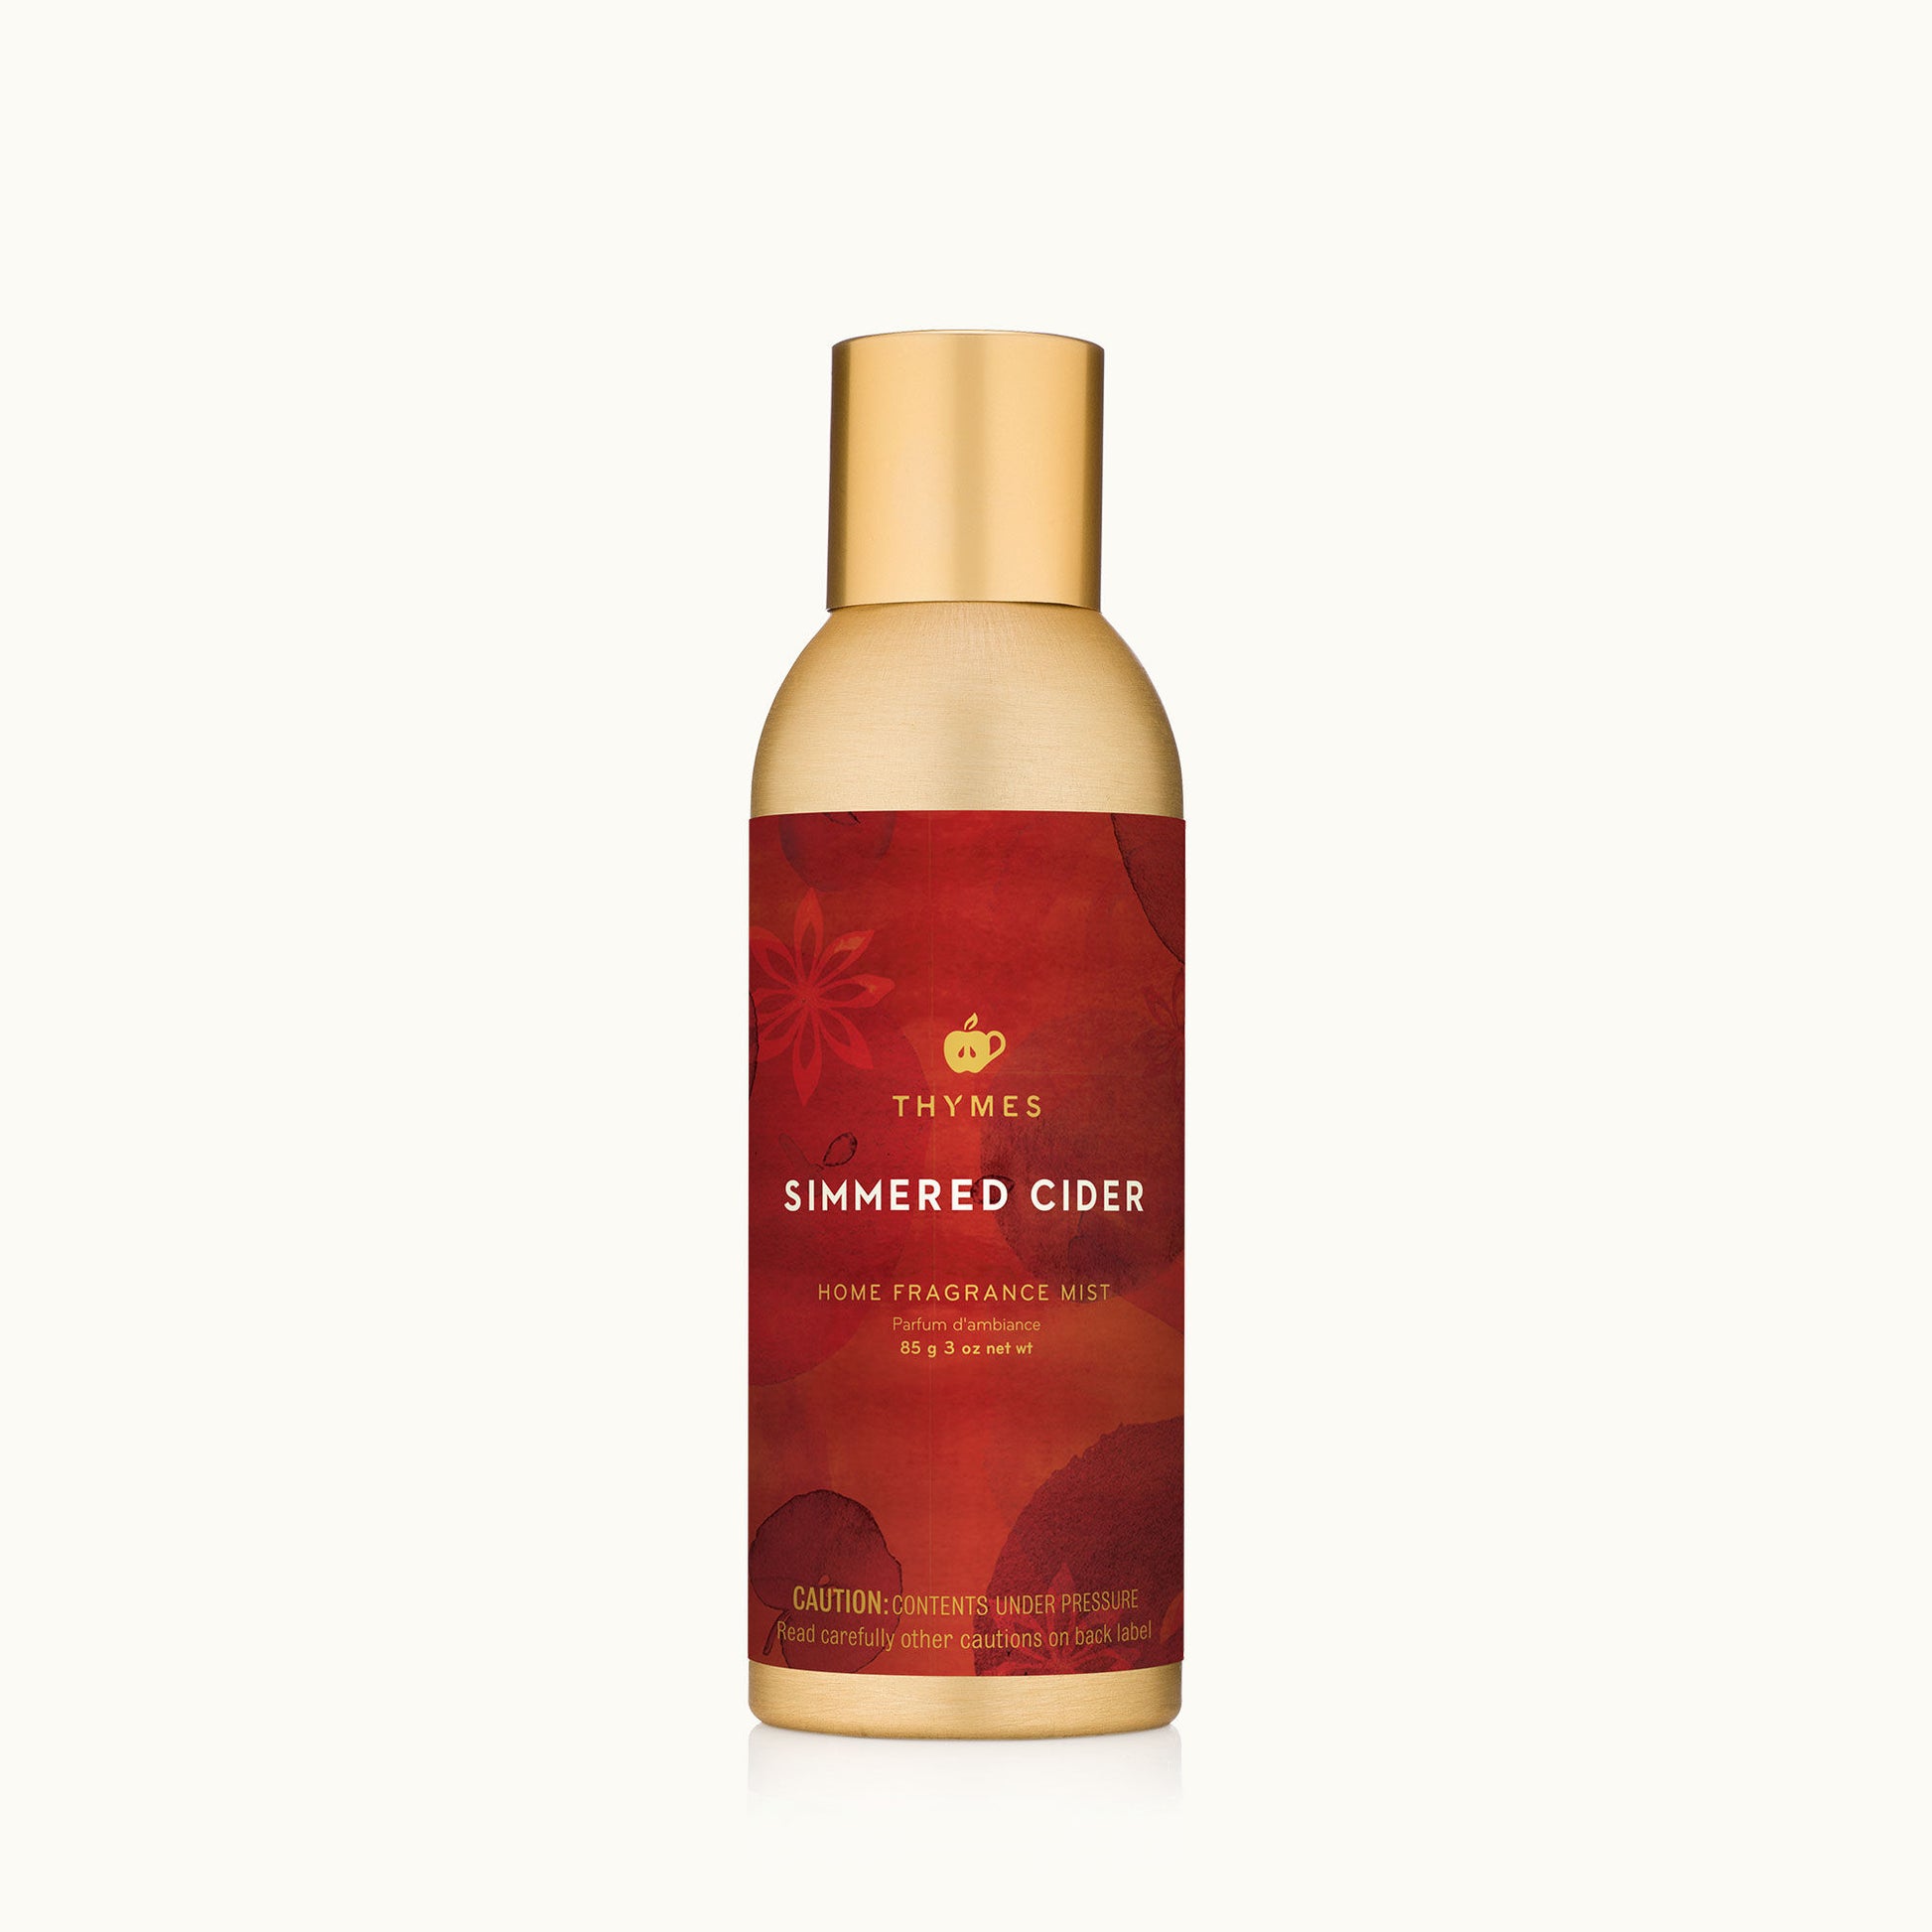 Thymes Simmered Cider Home Fragrance Mist-Room Spray-Thymes-The Village Shoppe, Women’s Fashion Boutique, Shop Online and In Store - Located in Muscle Shoals, AL.